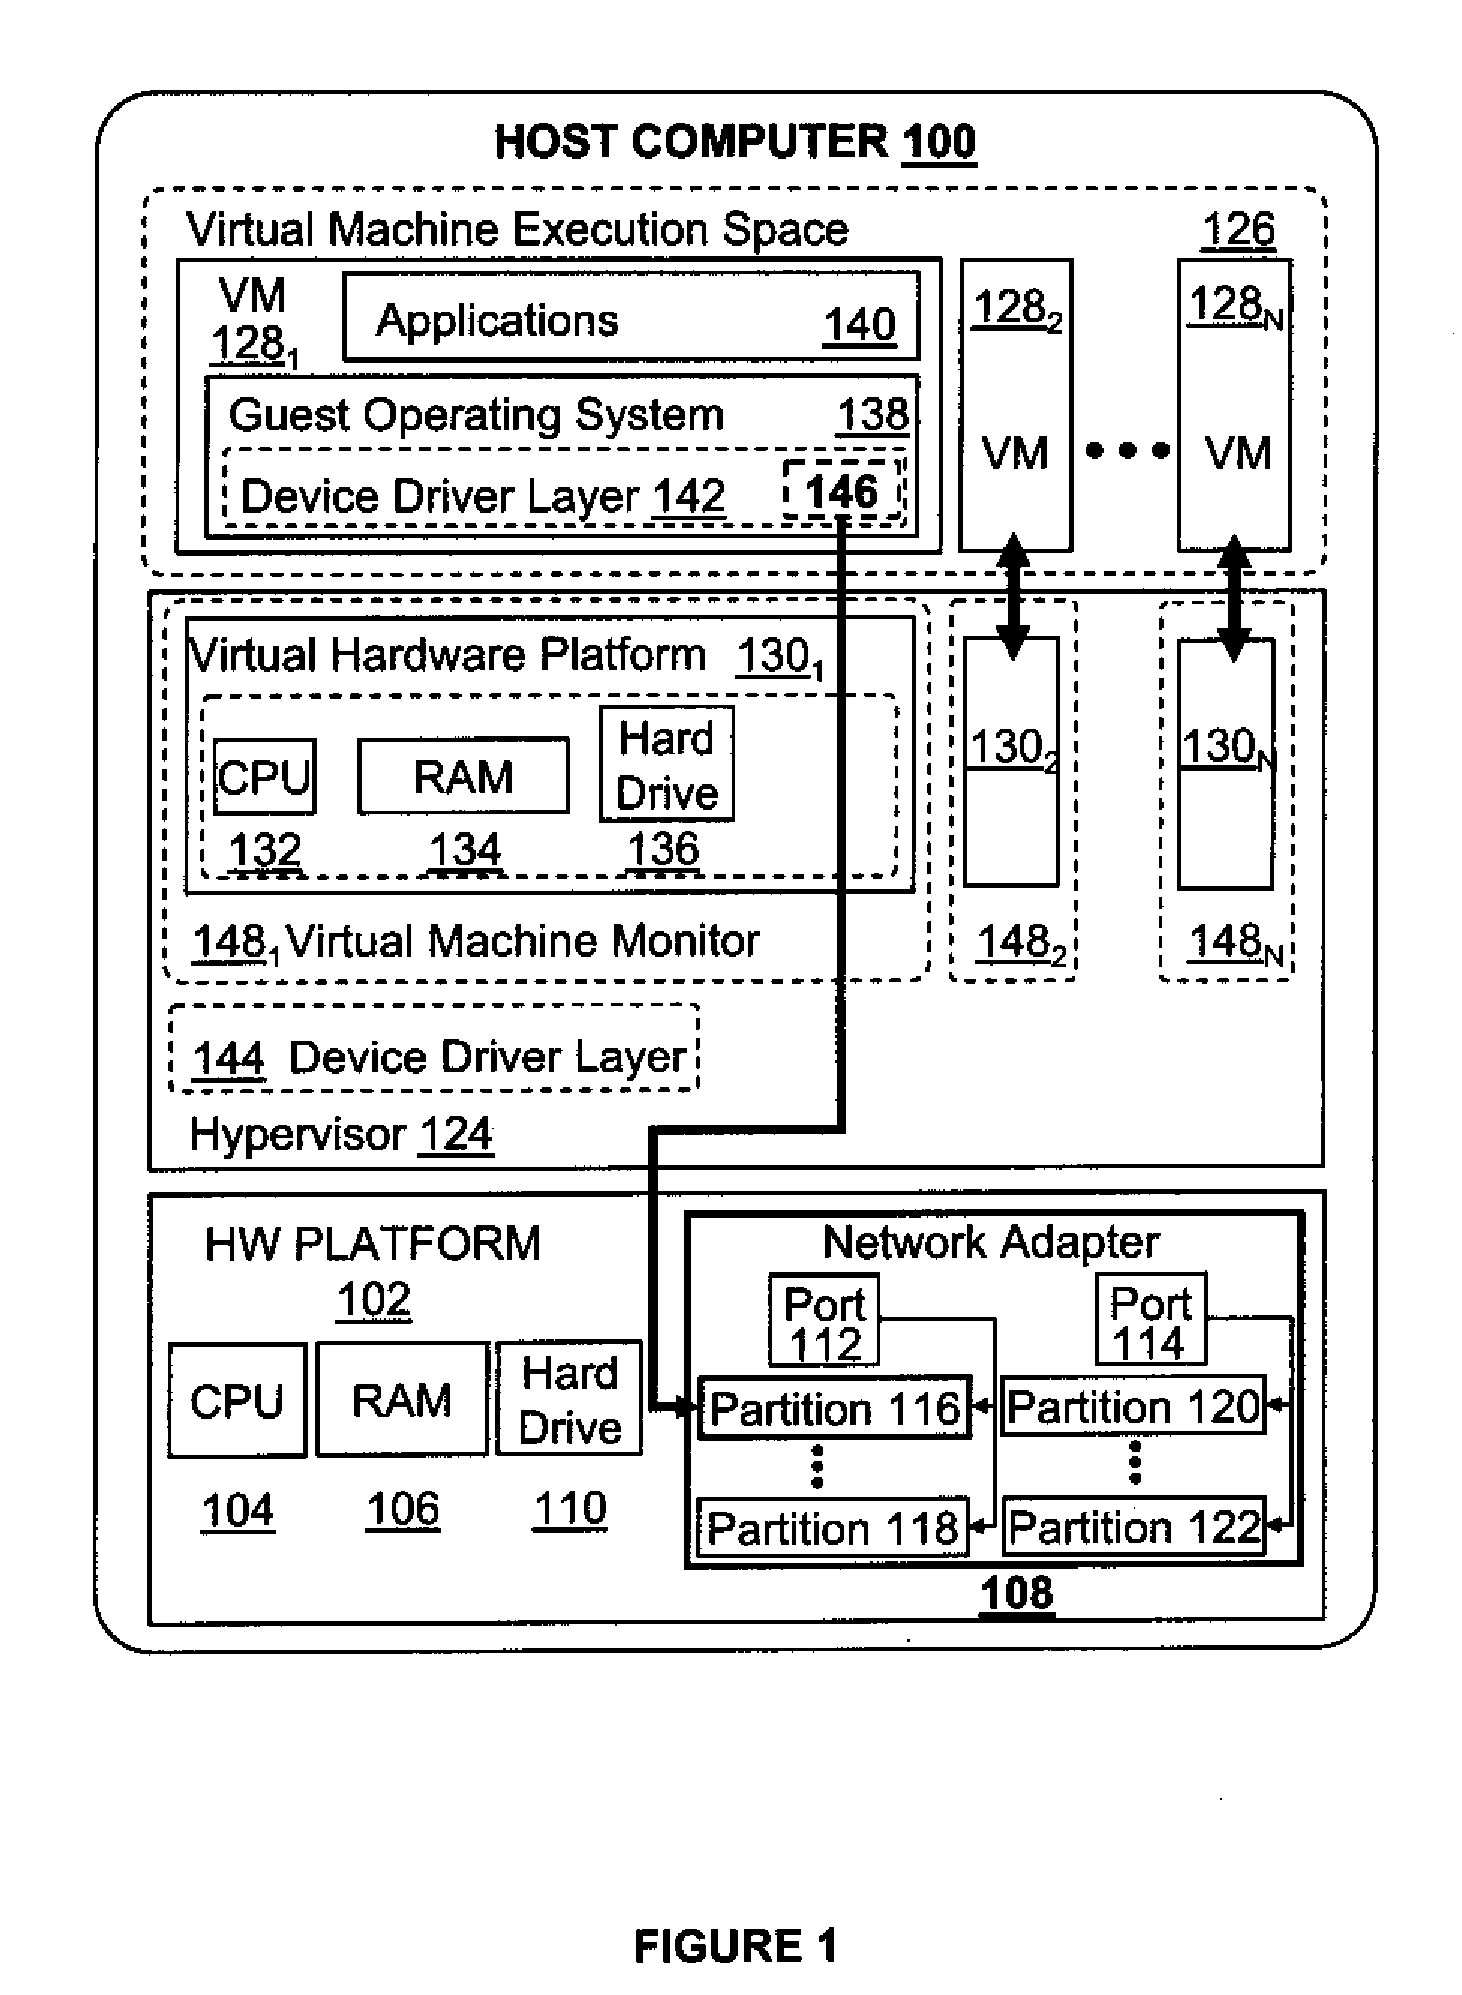 Migrating Virtual Machines Configured With Pass-Through Devices